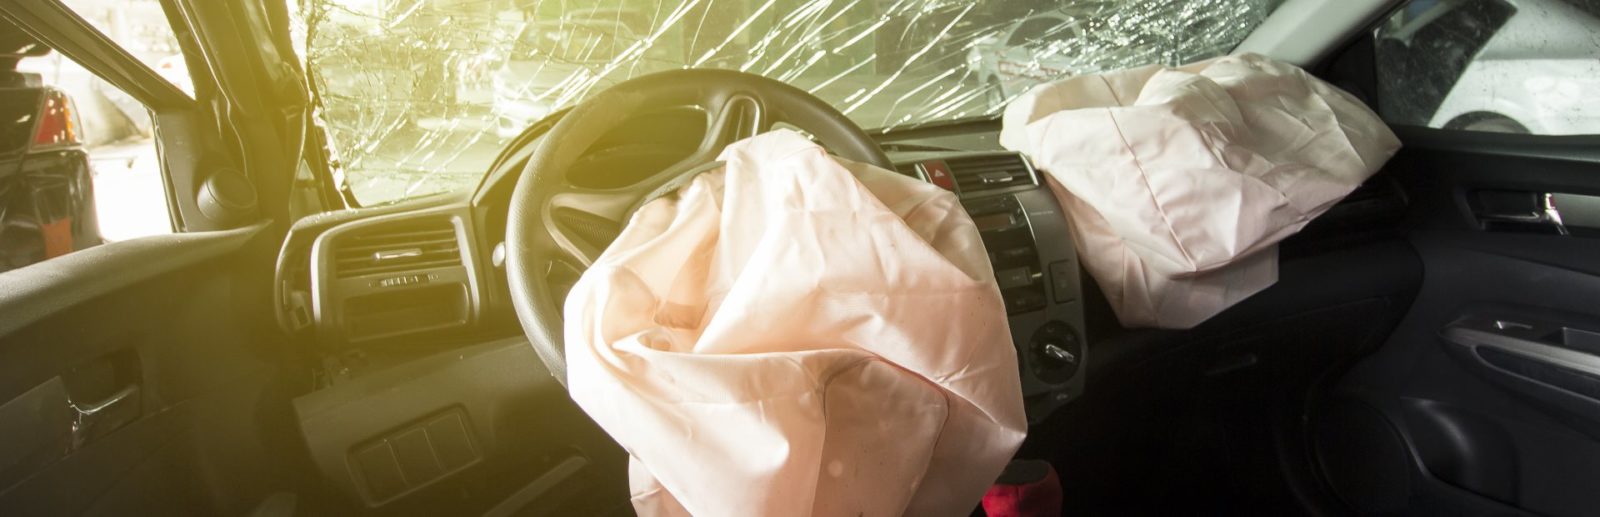 Airbag Recall List & Auto Airbag Settlements Defective Airbags